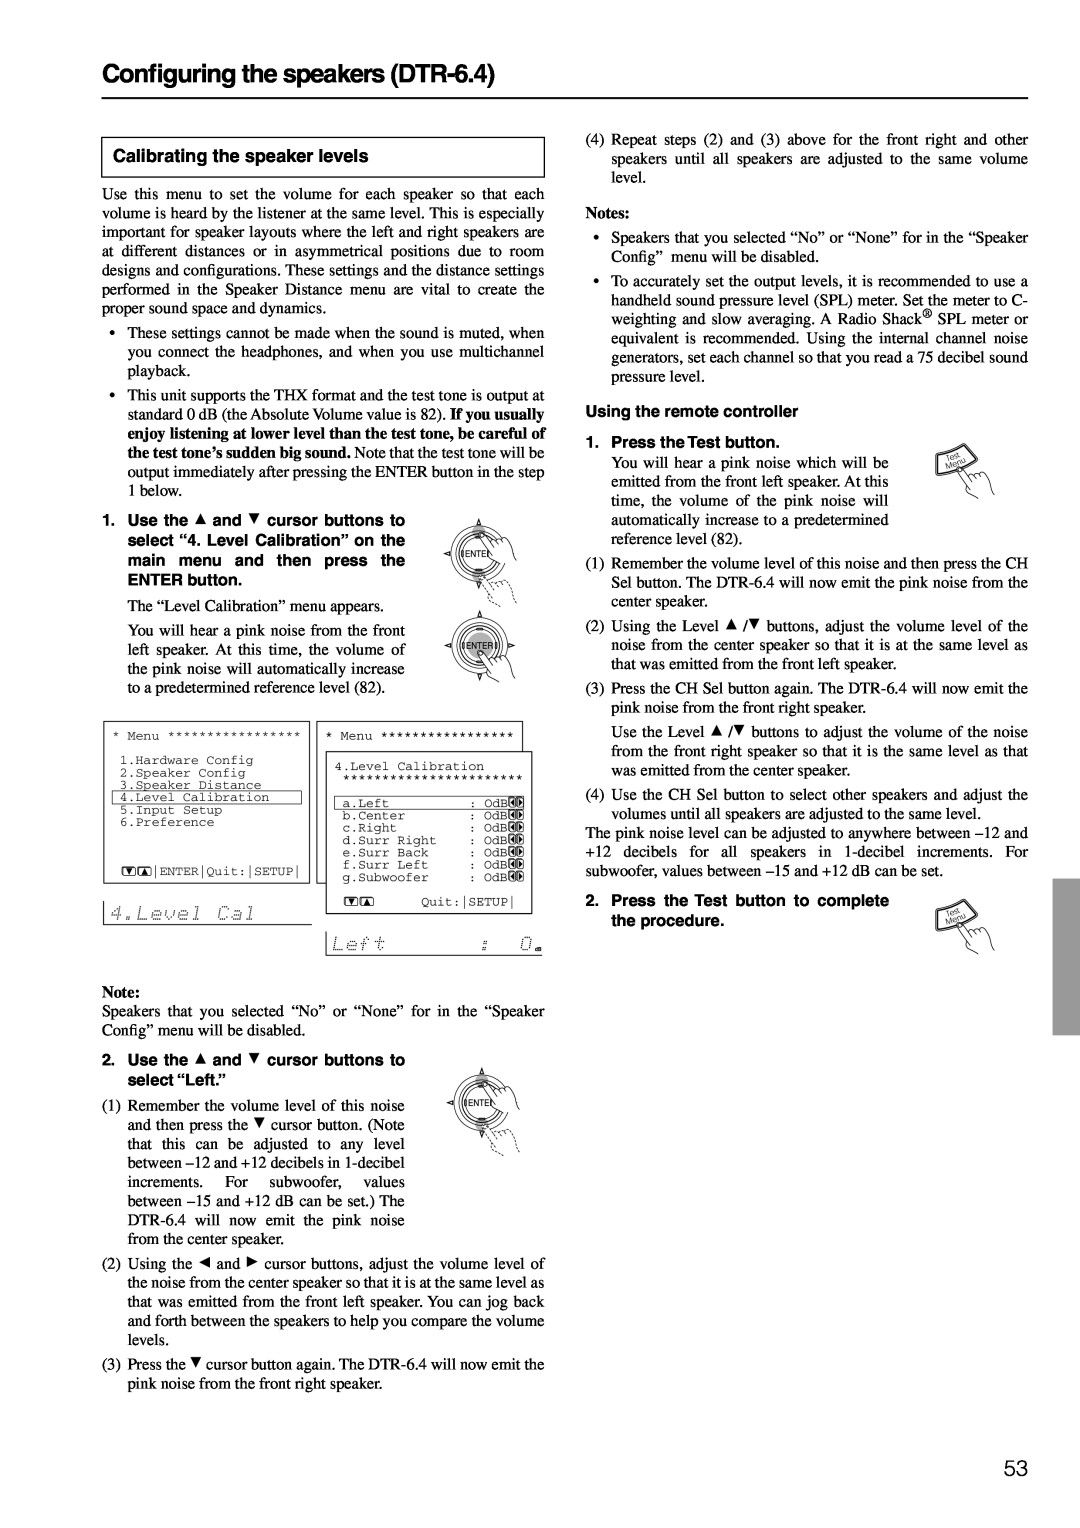 Integra DTR-6.4/5.4 instruction manual Conﬁguring the speakers DTR-6.4, Calibrating the speaker levels, Notes 